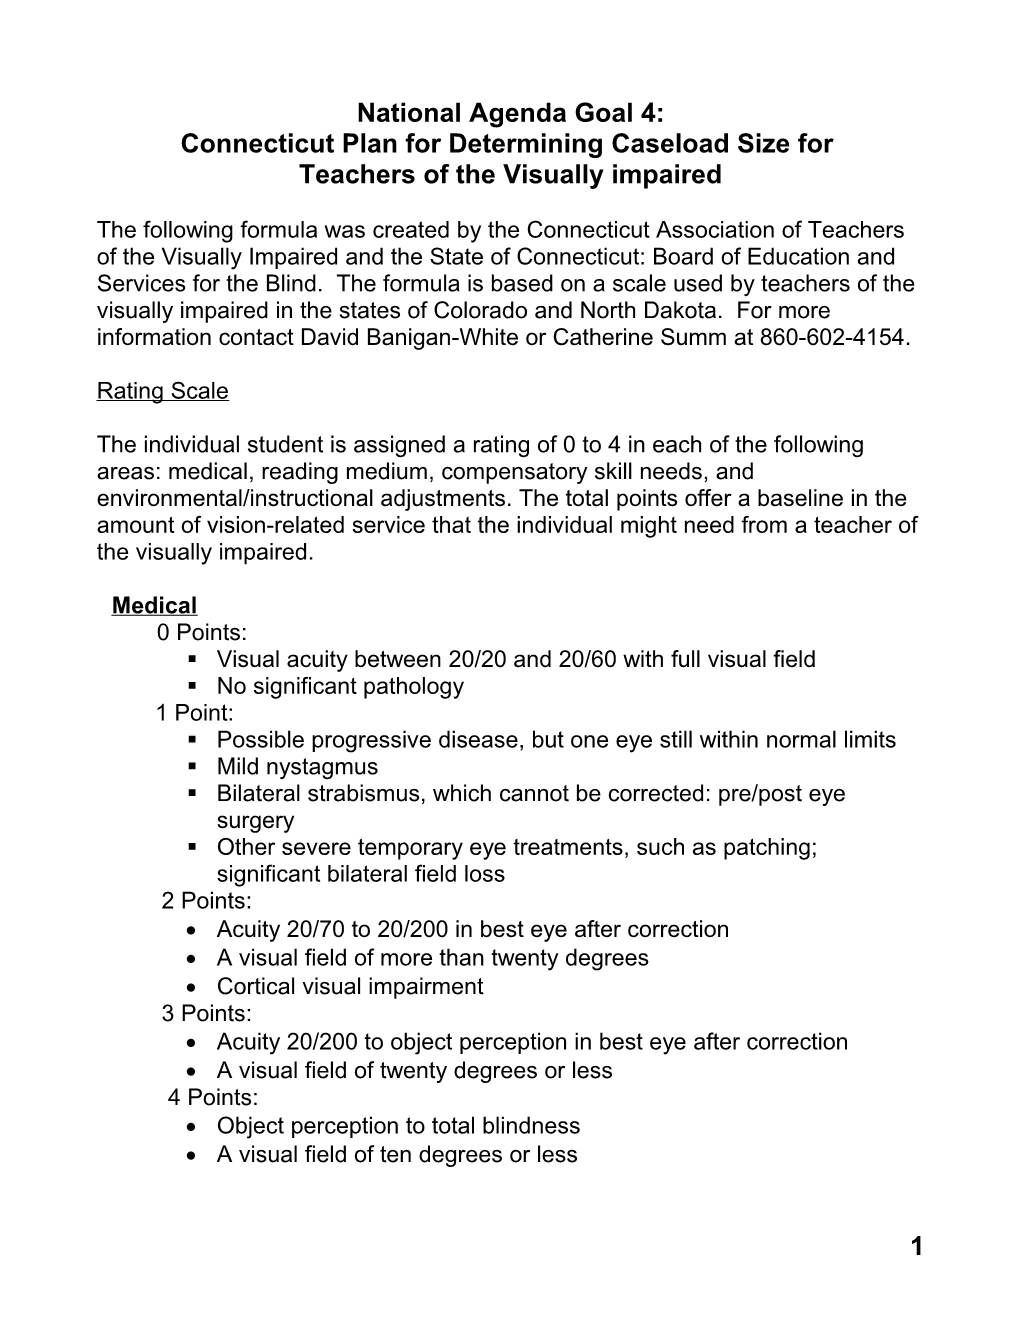 CT Plan for Determining Caseload Size for Teachers of the Visually Impaired